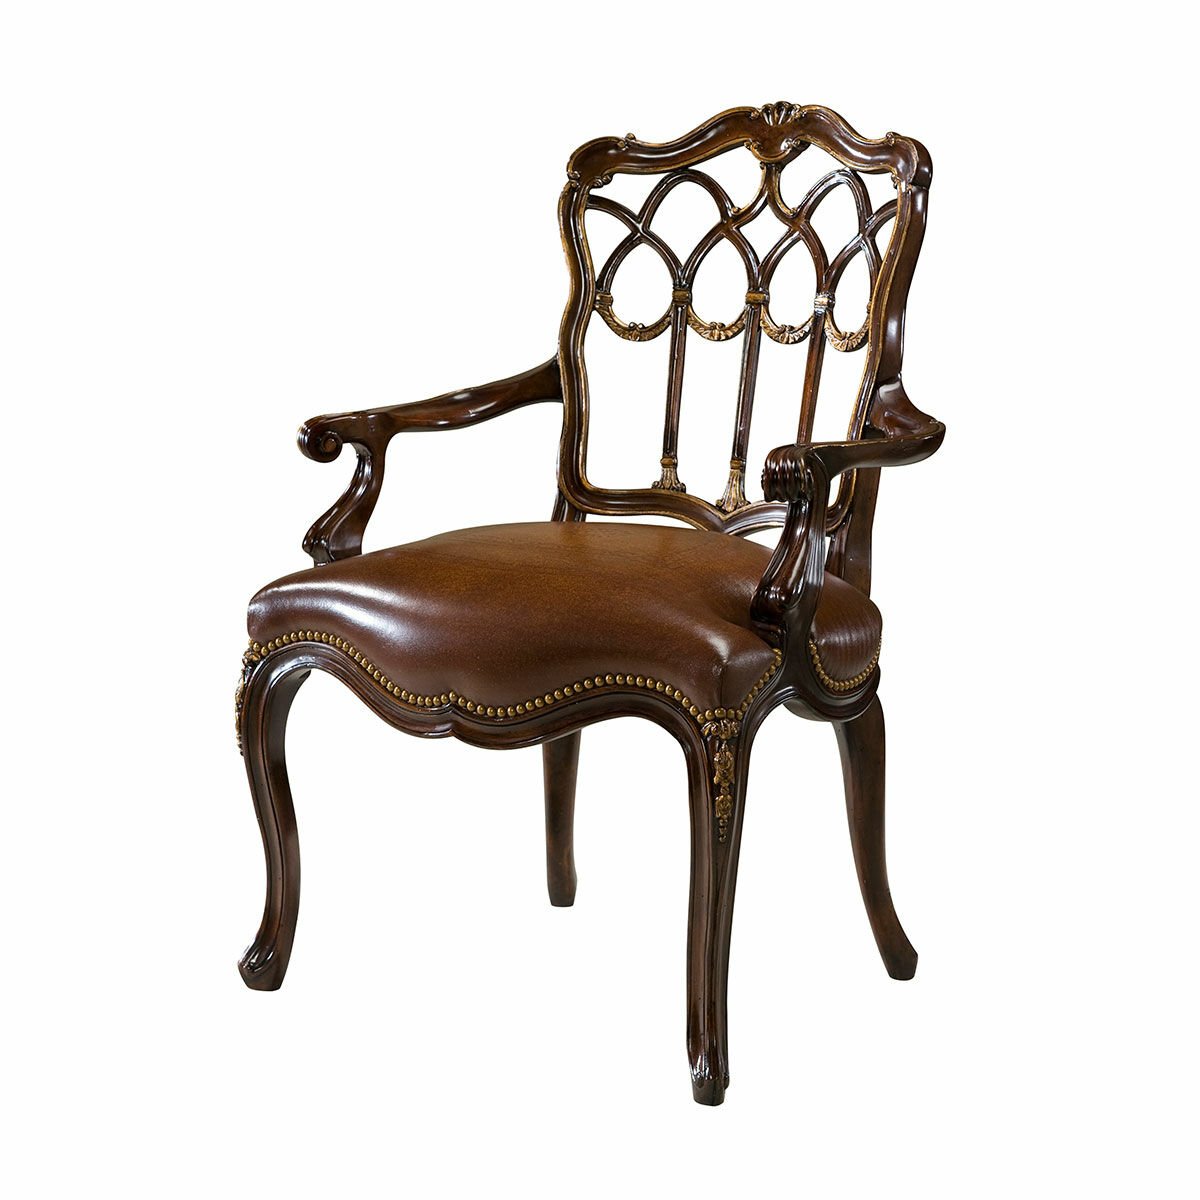 THE GOTHIC LIBRARY ARMCHAIR